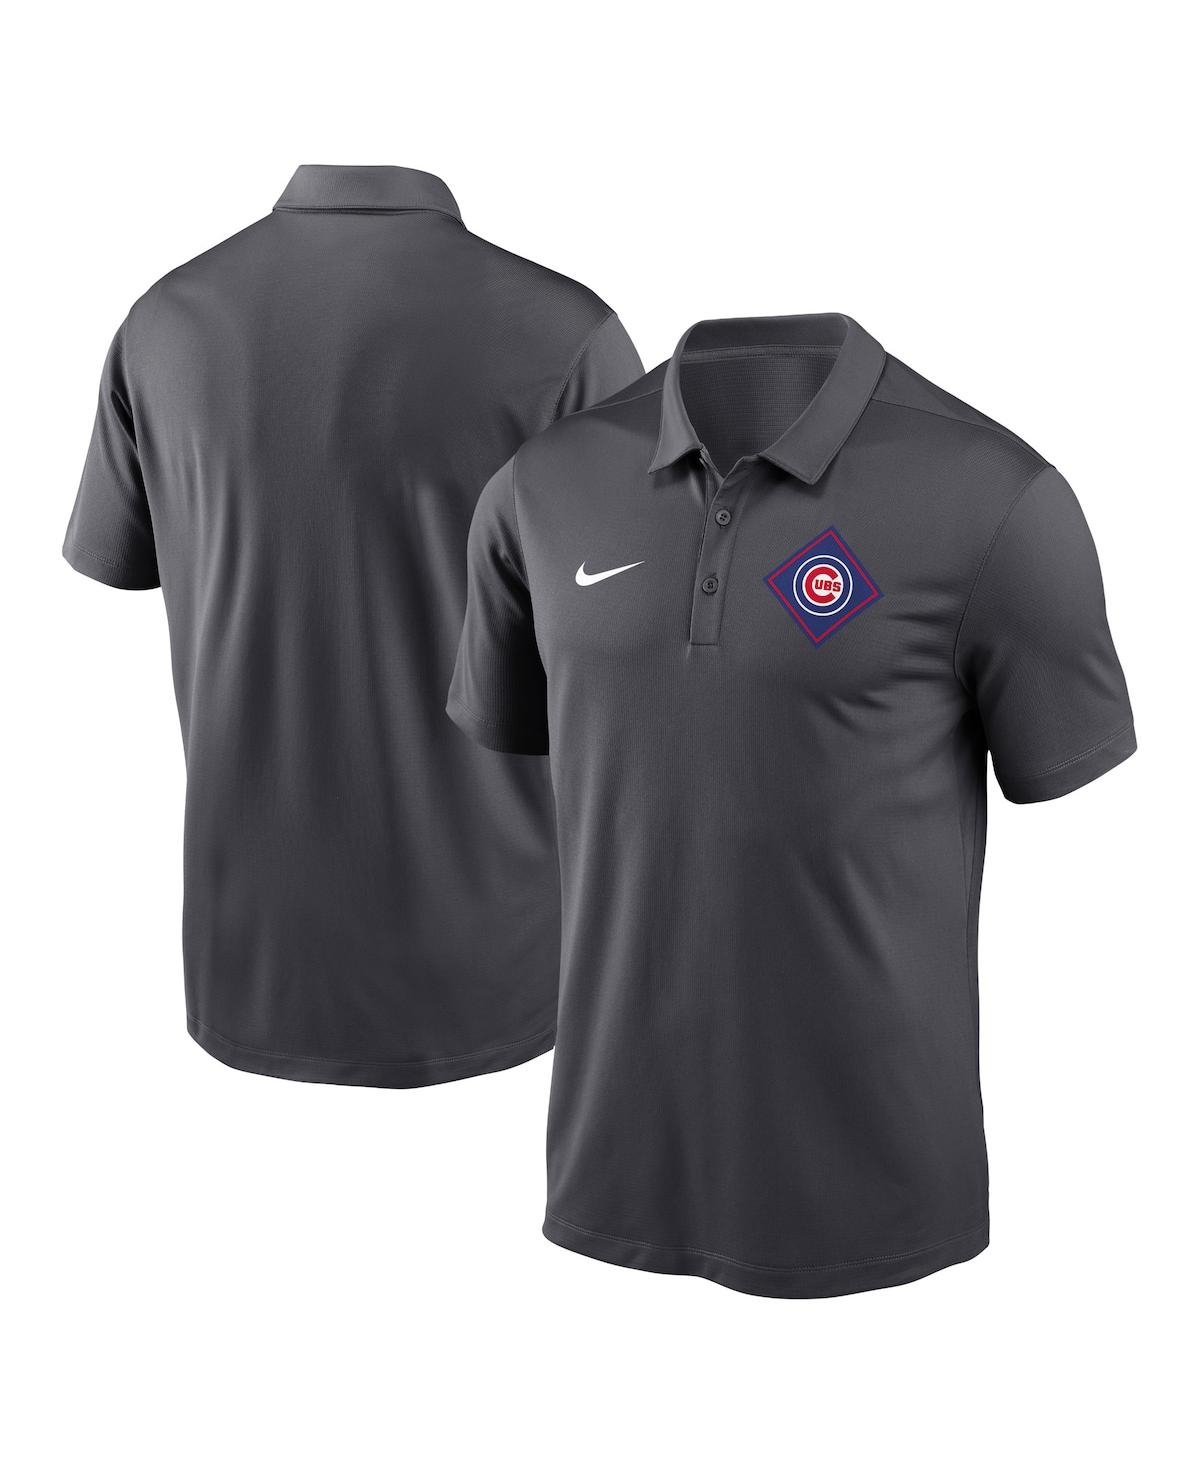 Men's Nike Anthracite Chicago Cubs Diamond Icon Franchise Performance Polo Shirt - Anthracite